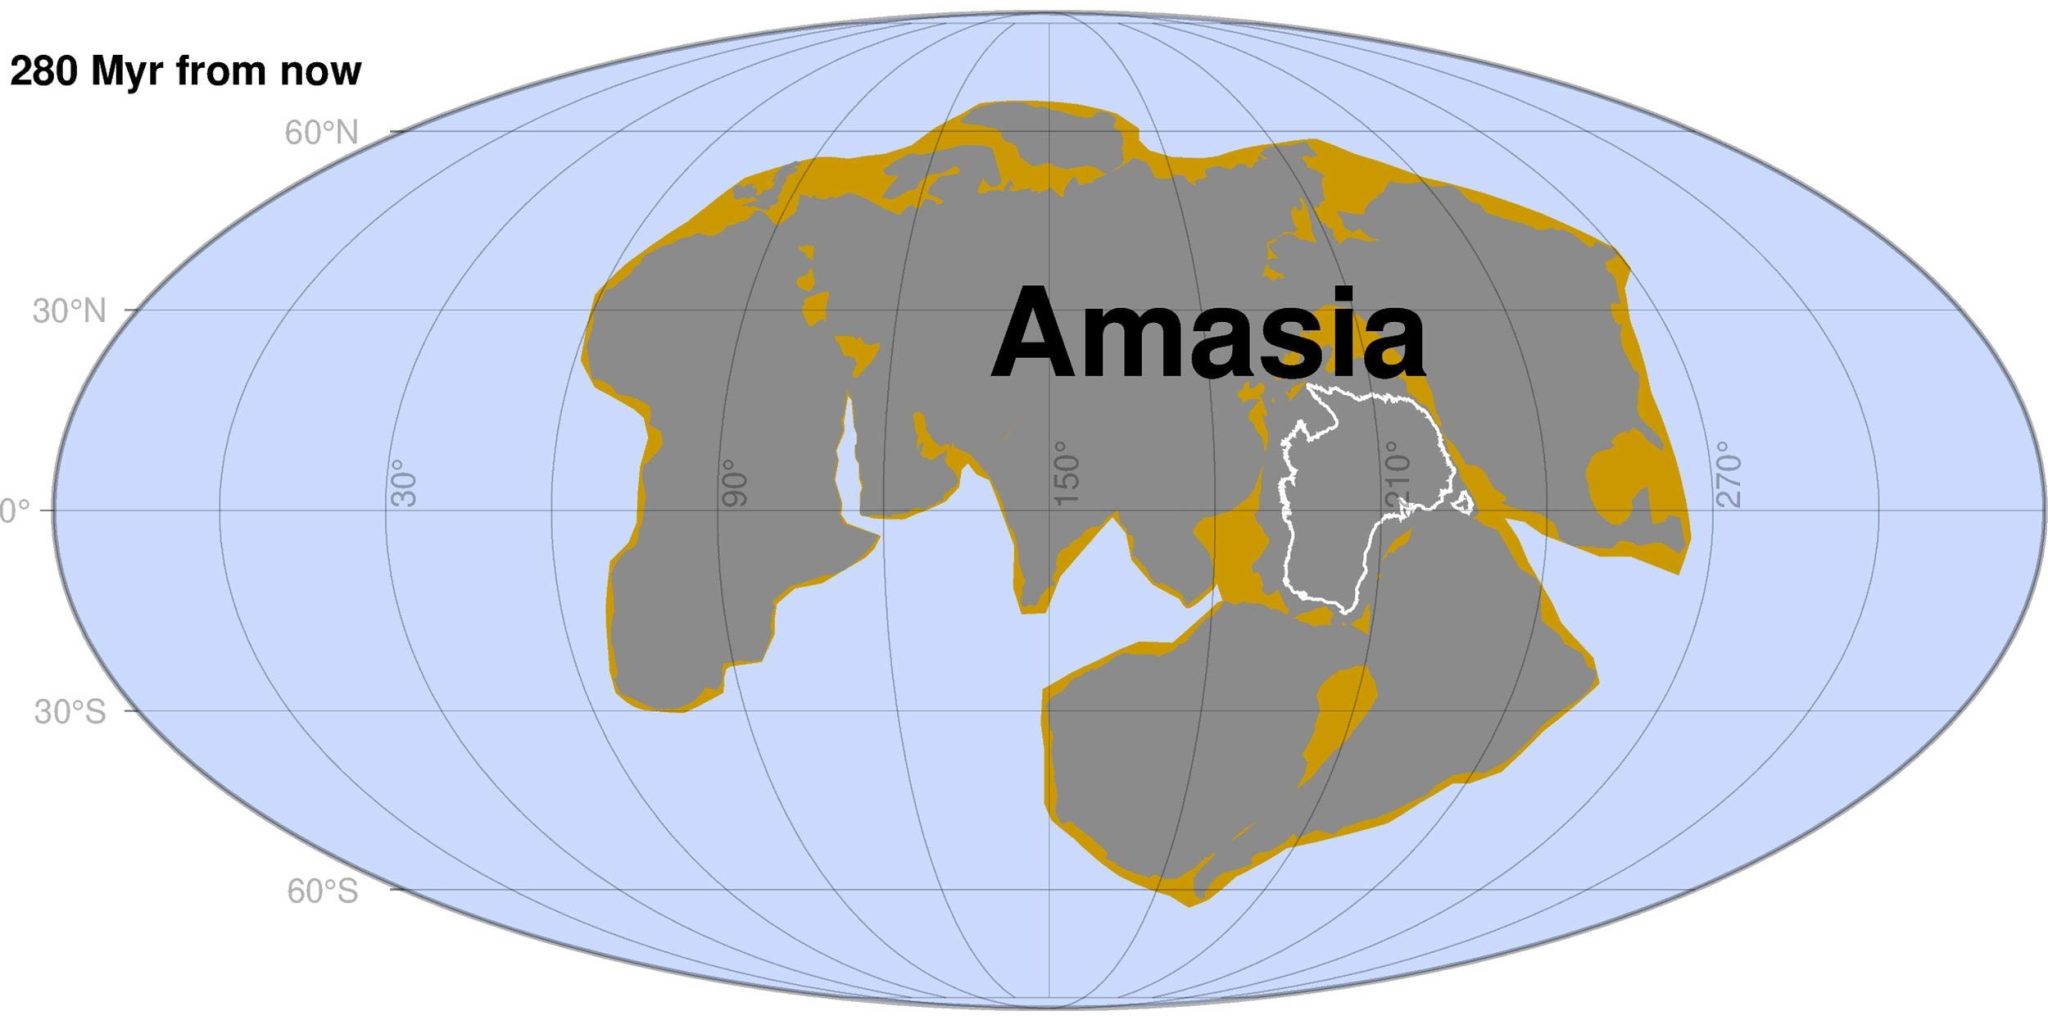 Daily News | Online News Supercontinent Amasia